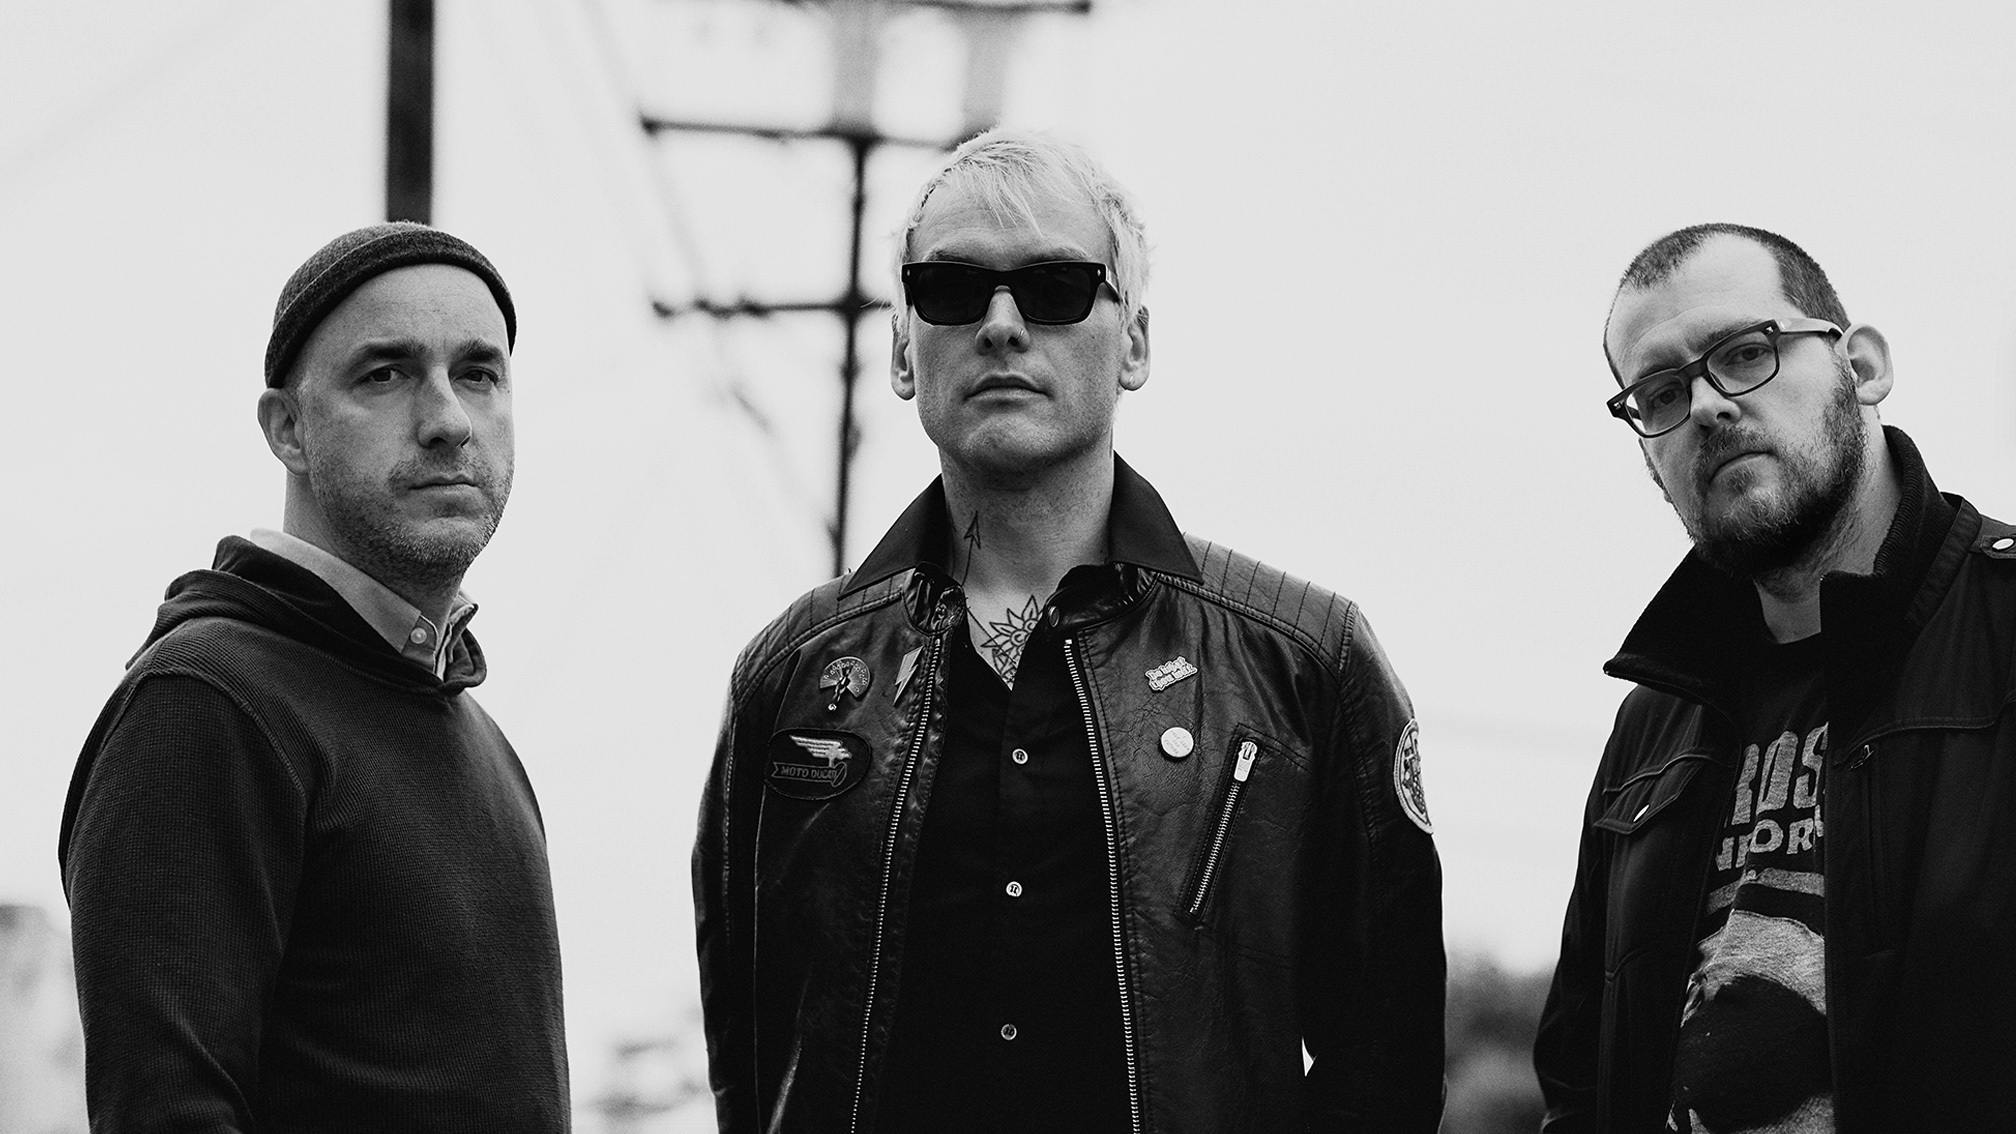 Alkaline Trio and Taking Back Sunday announce co-headline UK tour